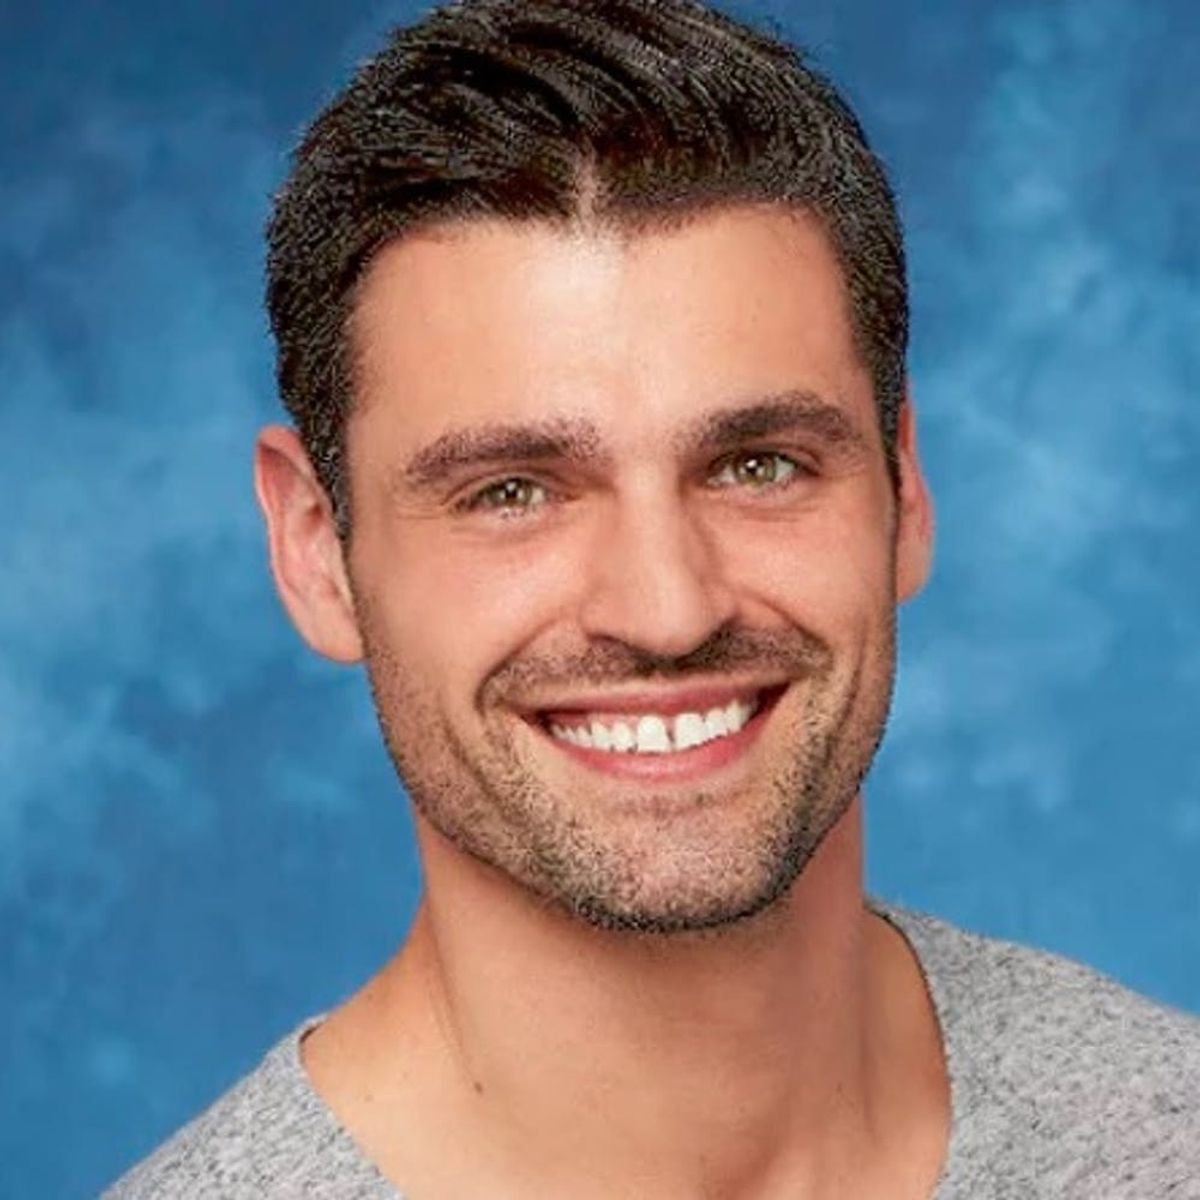 The Bachelorette’s Peter Kraus Listed “Be on The Bachelor” in His HS Yearbook Goals